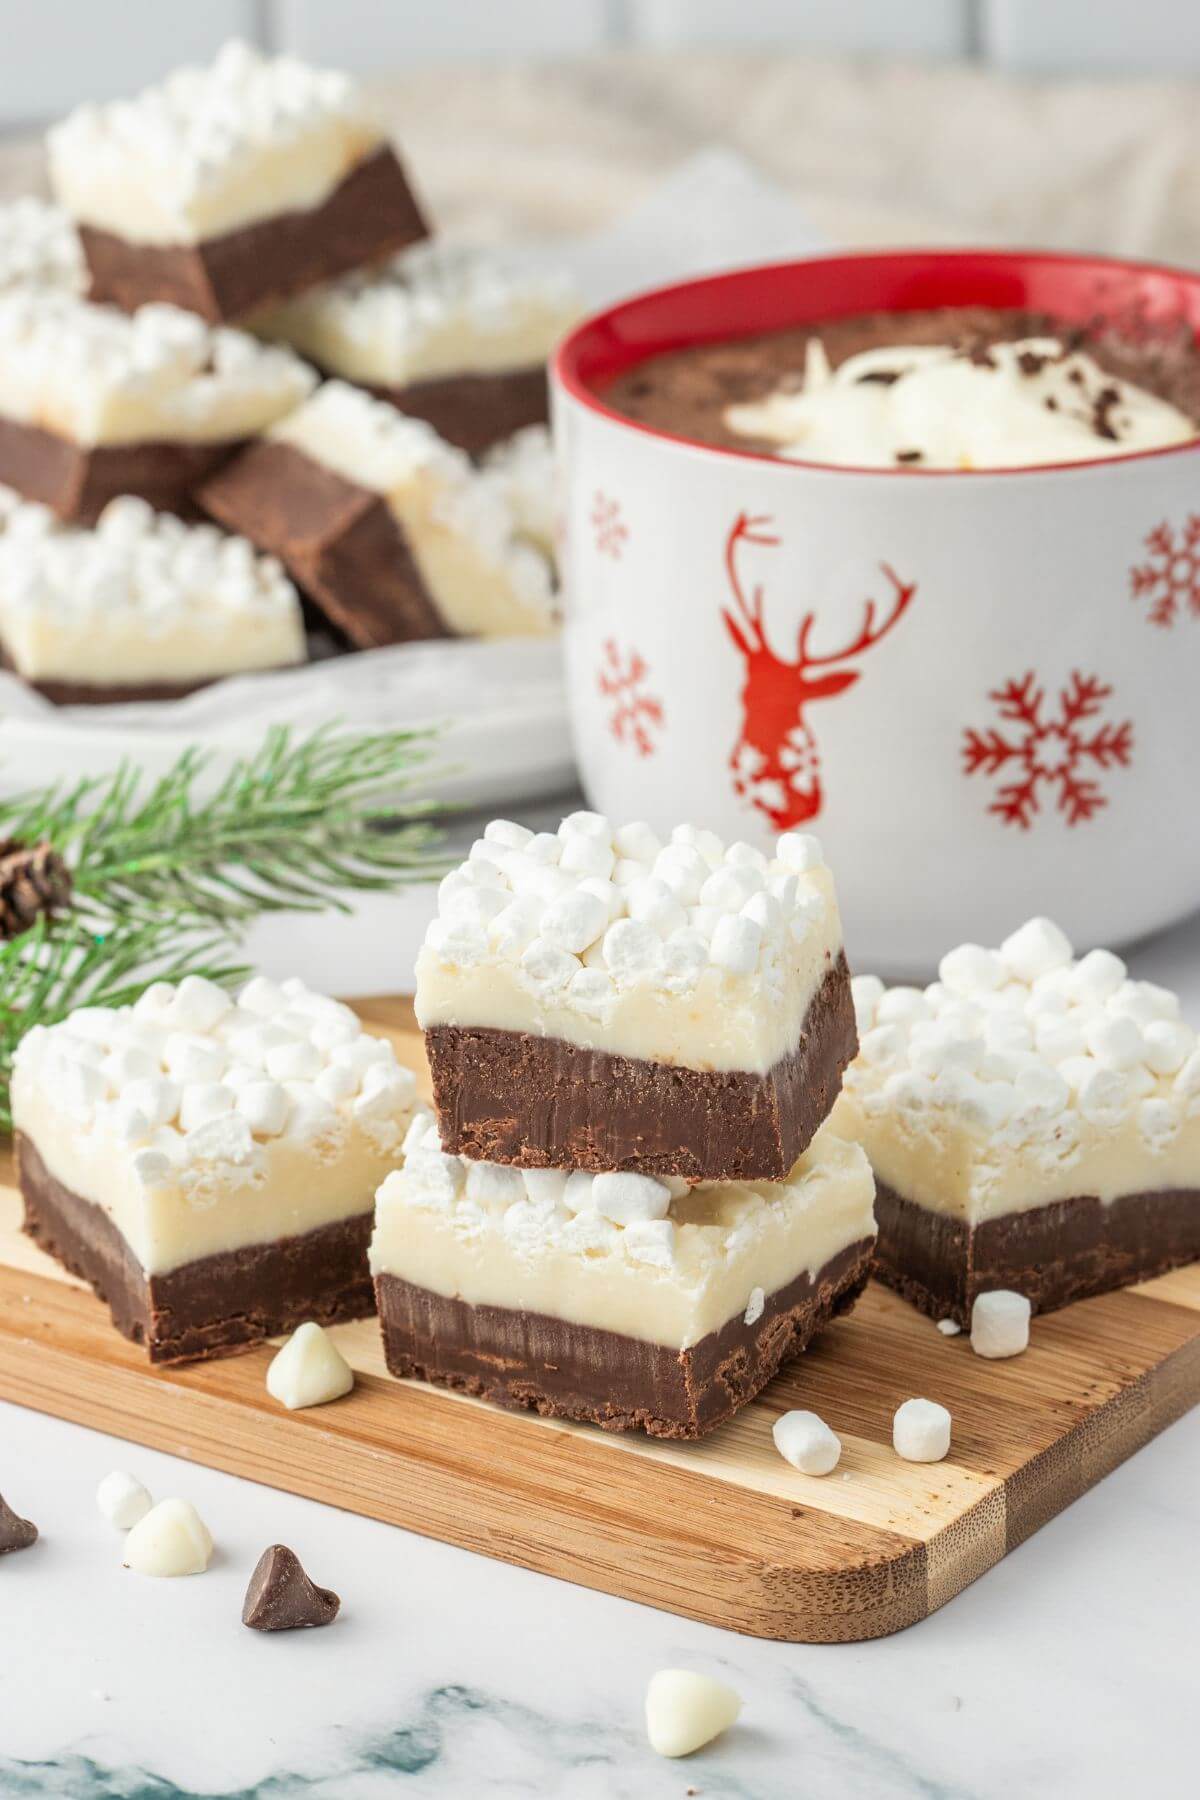 Easy Hot Chocolate Fudge pieces by mug of hot chocolate and full plate of fudge.